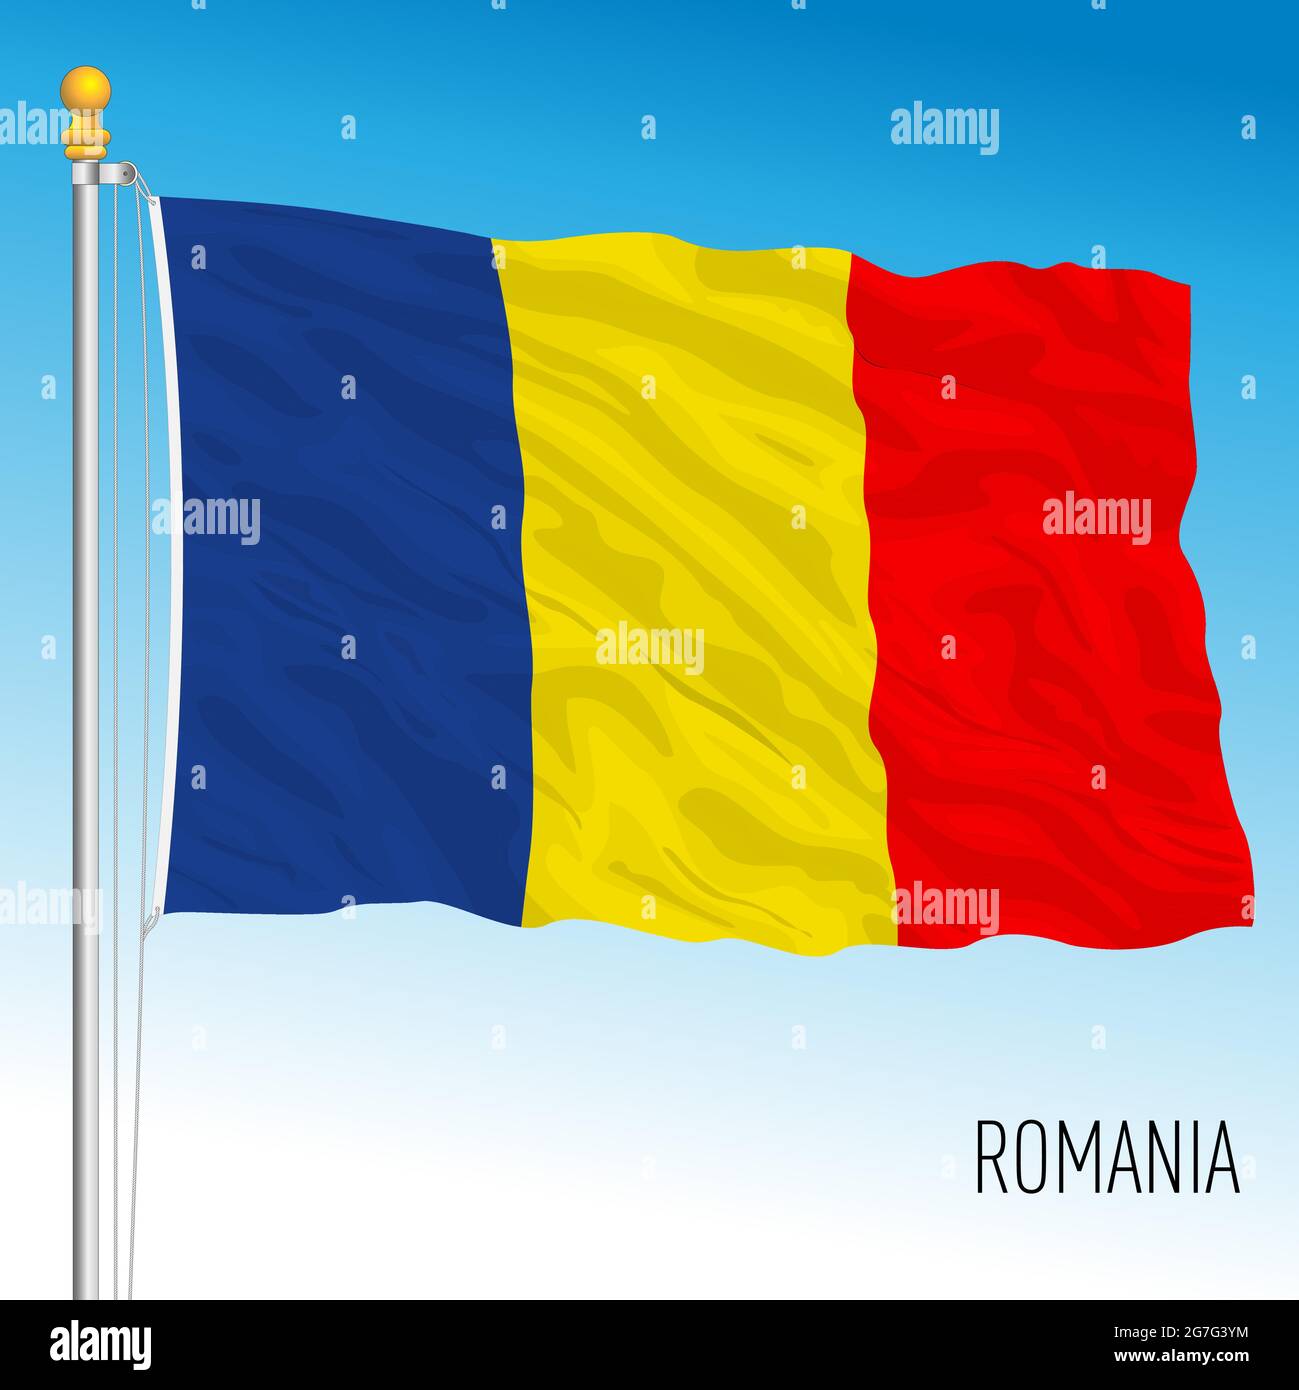 Luxury Waving Romania Flag - Collage with Crown Icons Stock Vector -  Illustration of banner, flag: 226091812